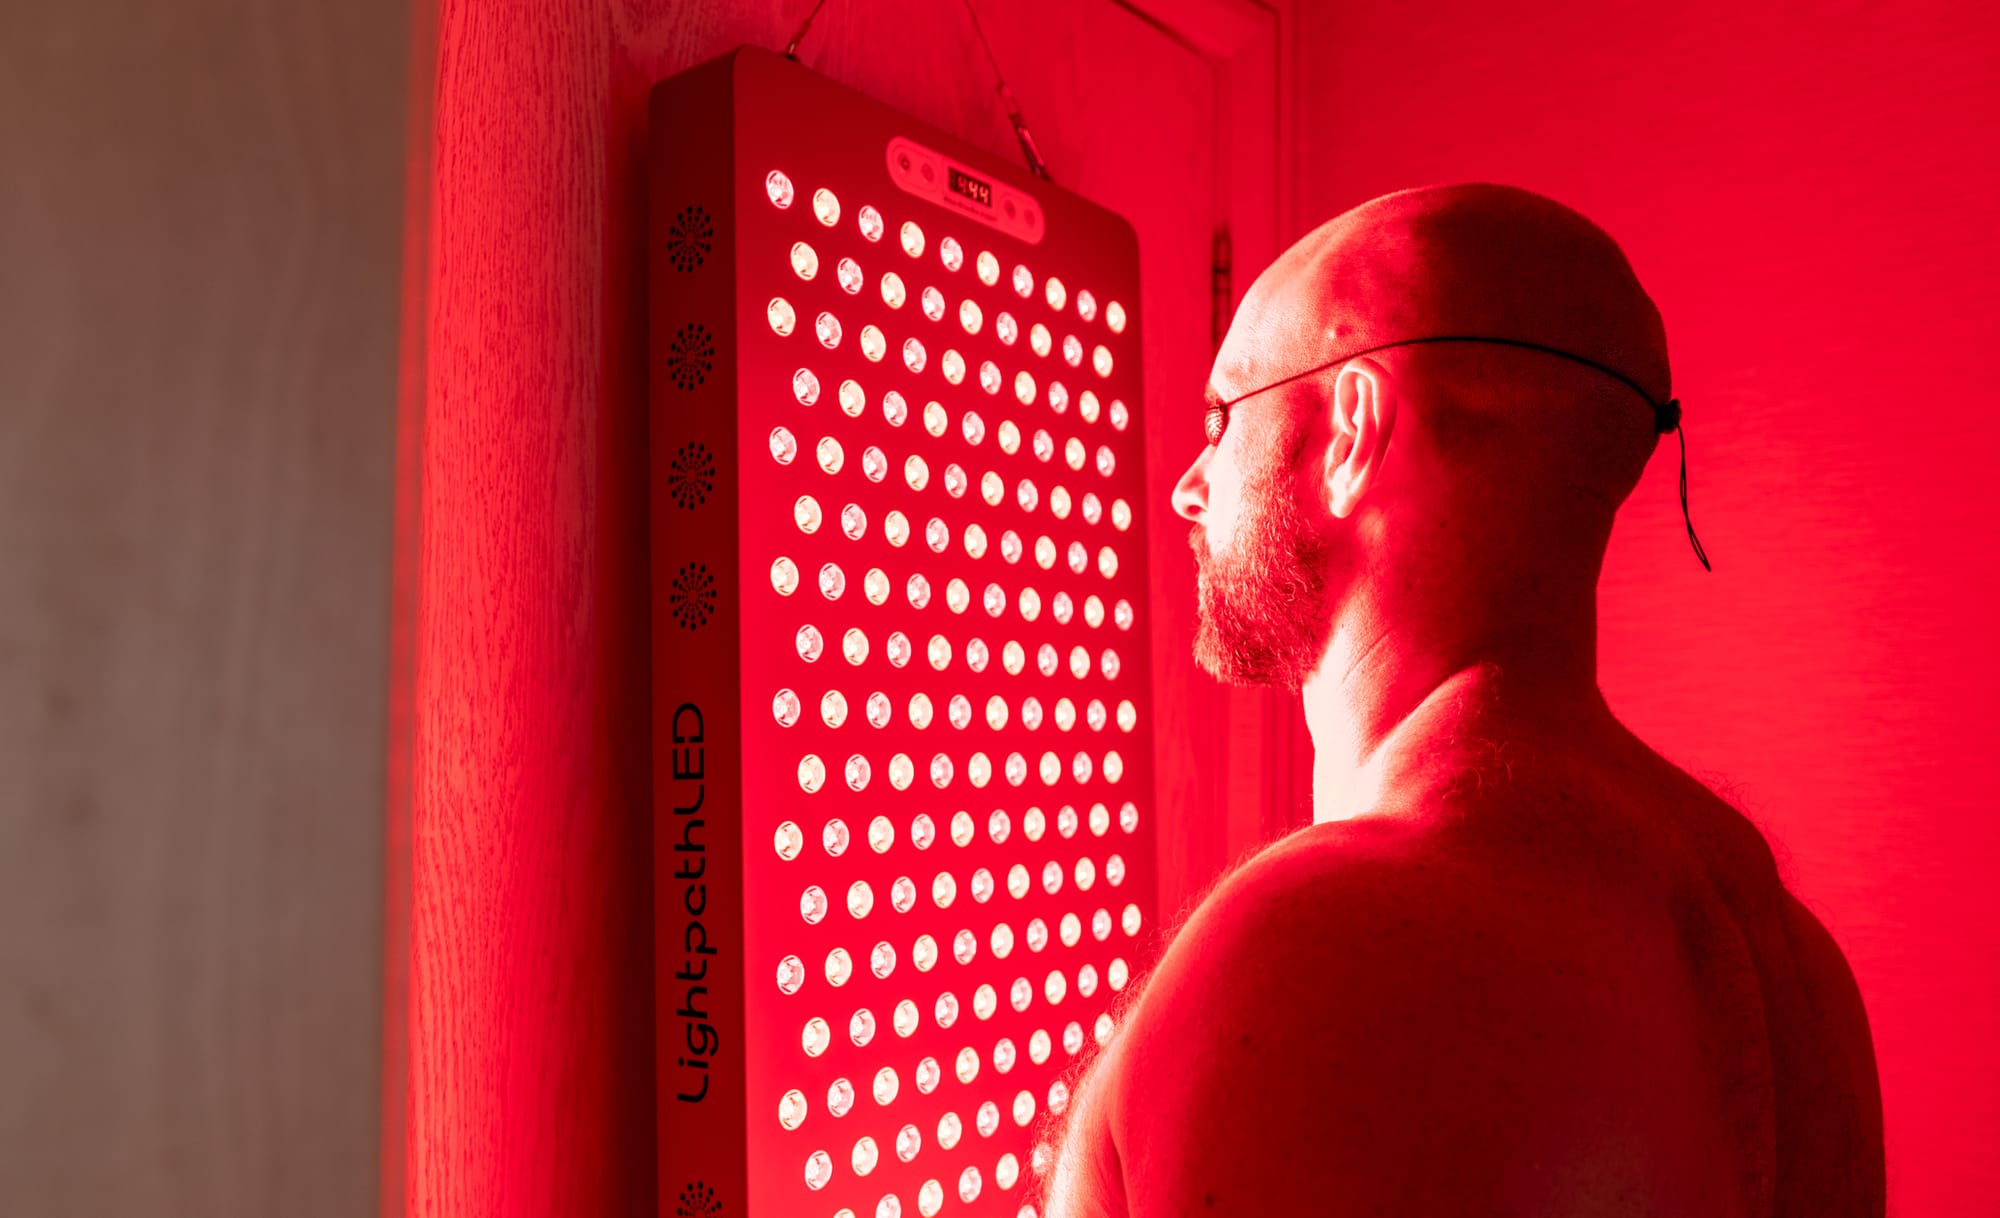 Red Light Therapy: What’s The Ideal Distance from Skin?